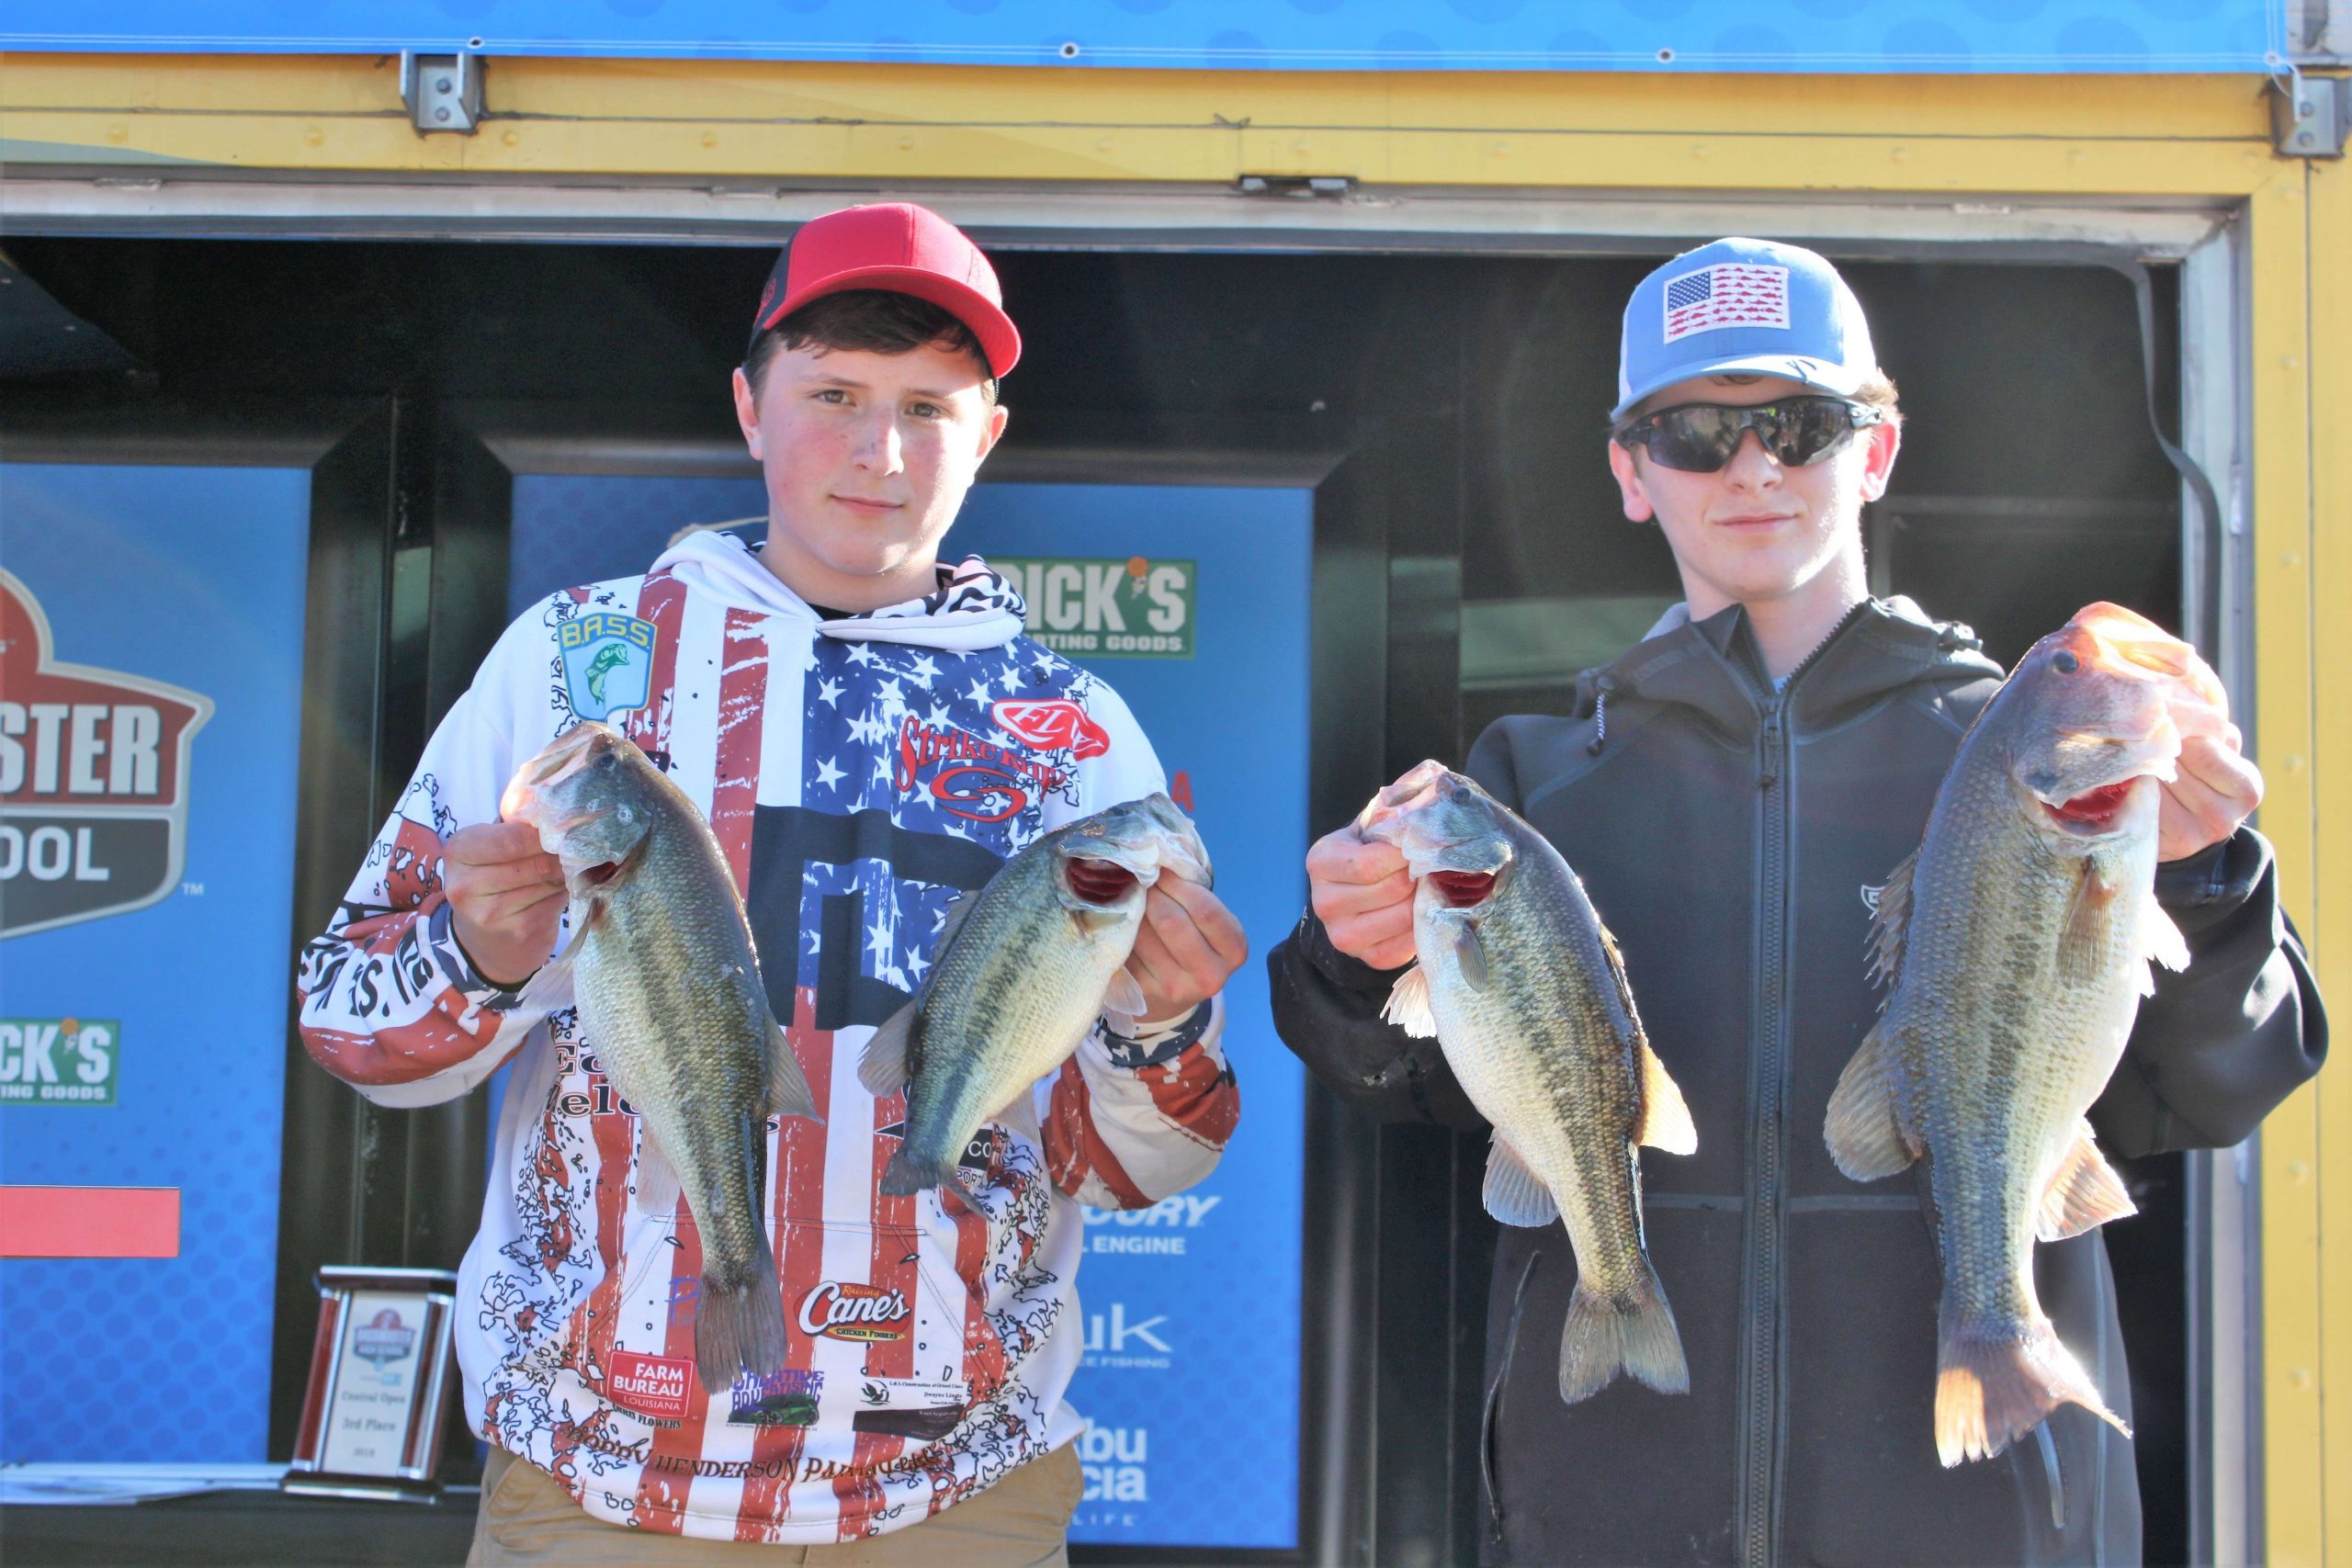 Jacob Lee and Mason Bounds of the North DeSoto High School had 14 pounds and finished 11th in the tournament.